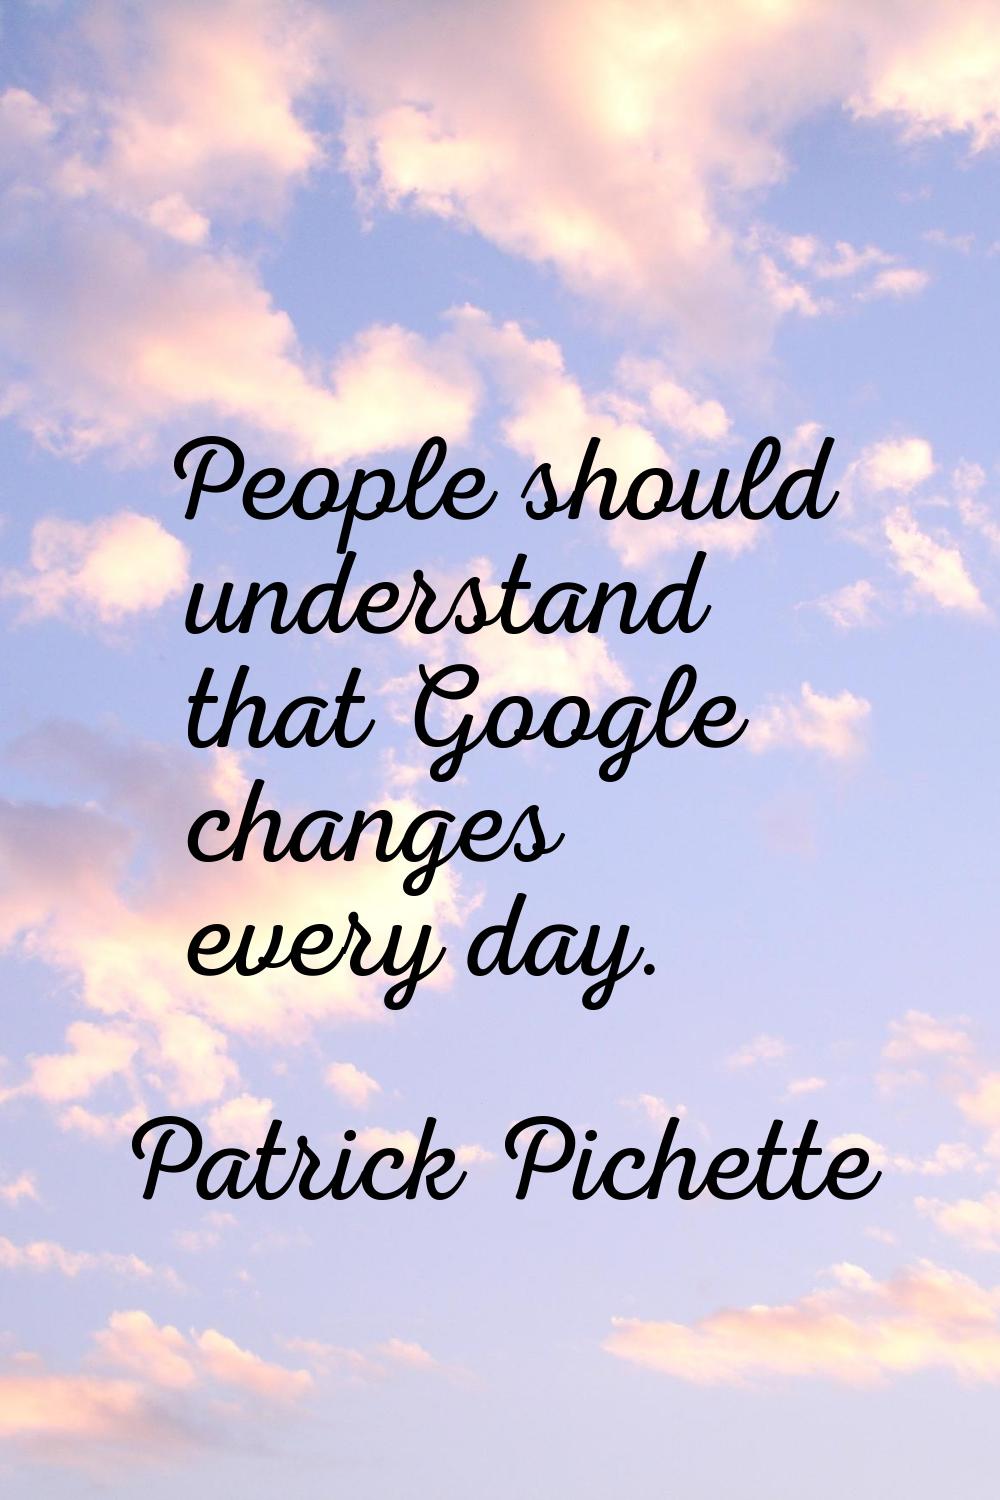 People should understand that Google changes every day.